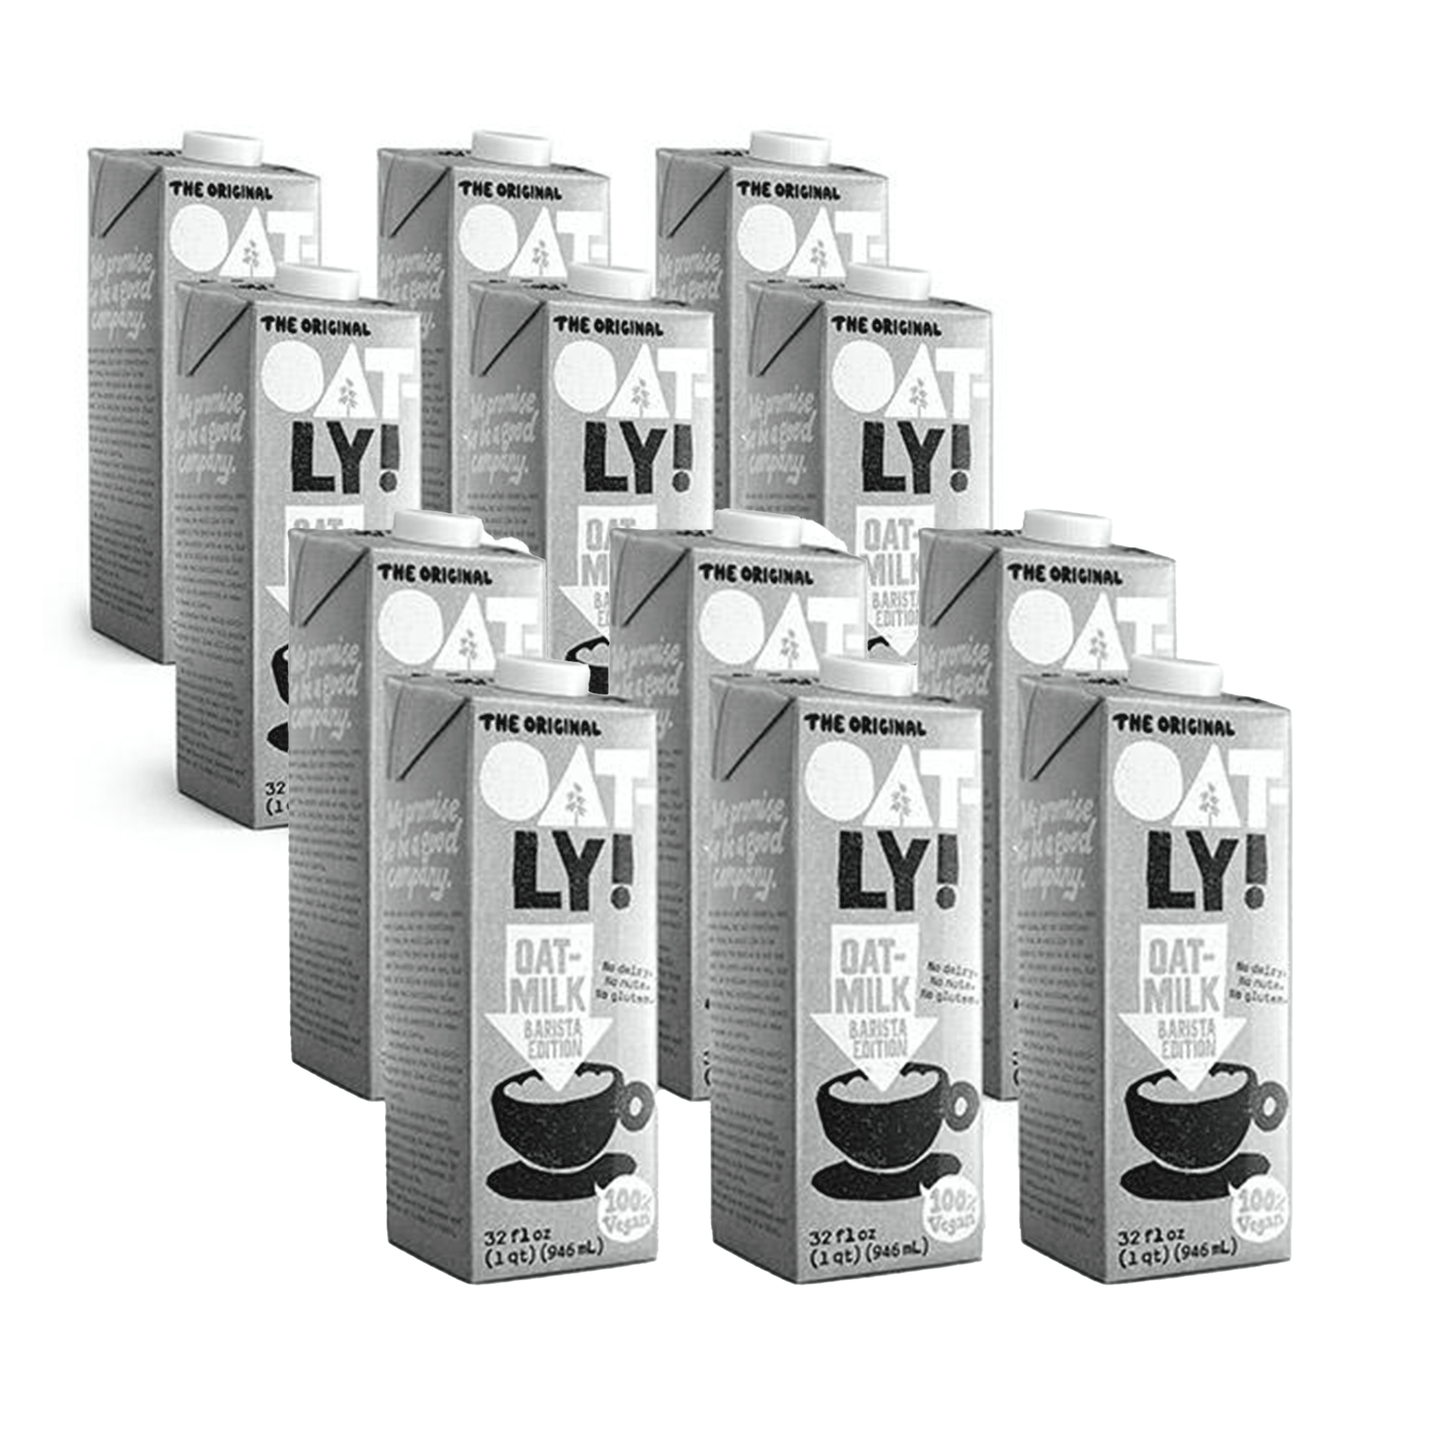 Oatly Barista Blend at Grocery Outlet for 99¢ : r/espresso